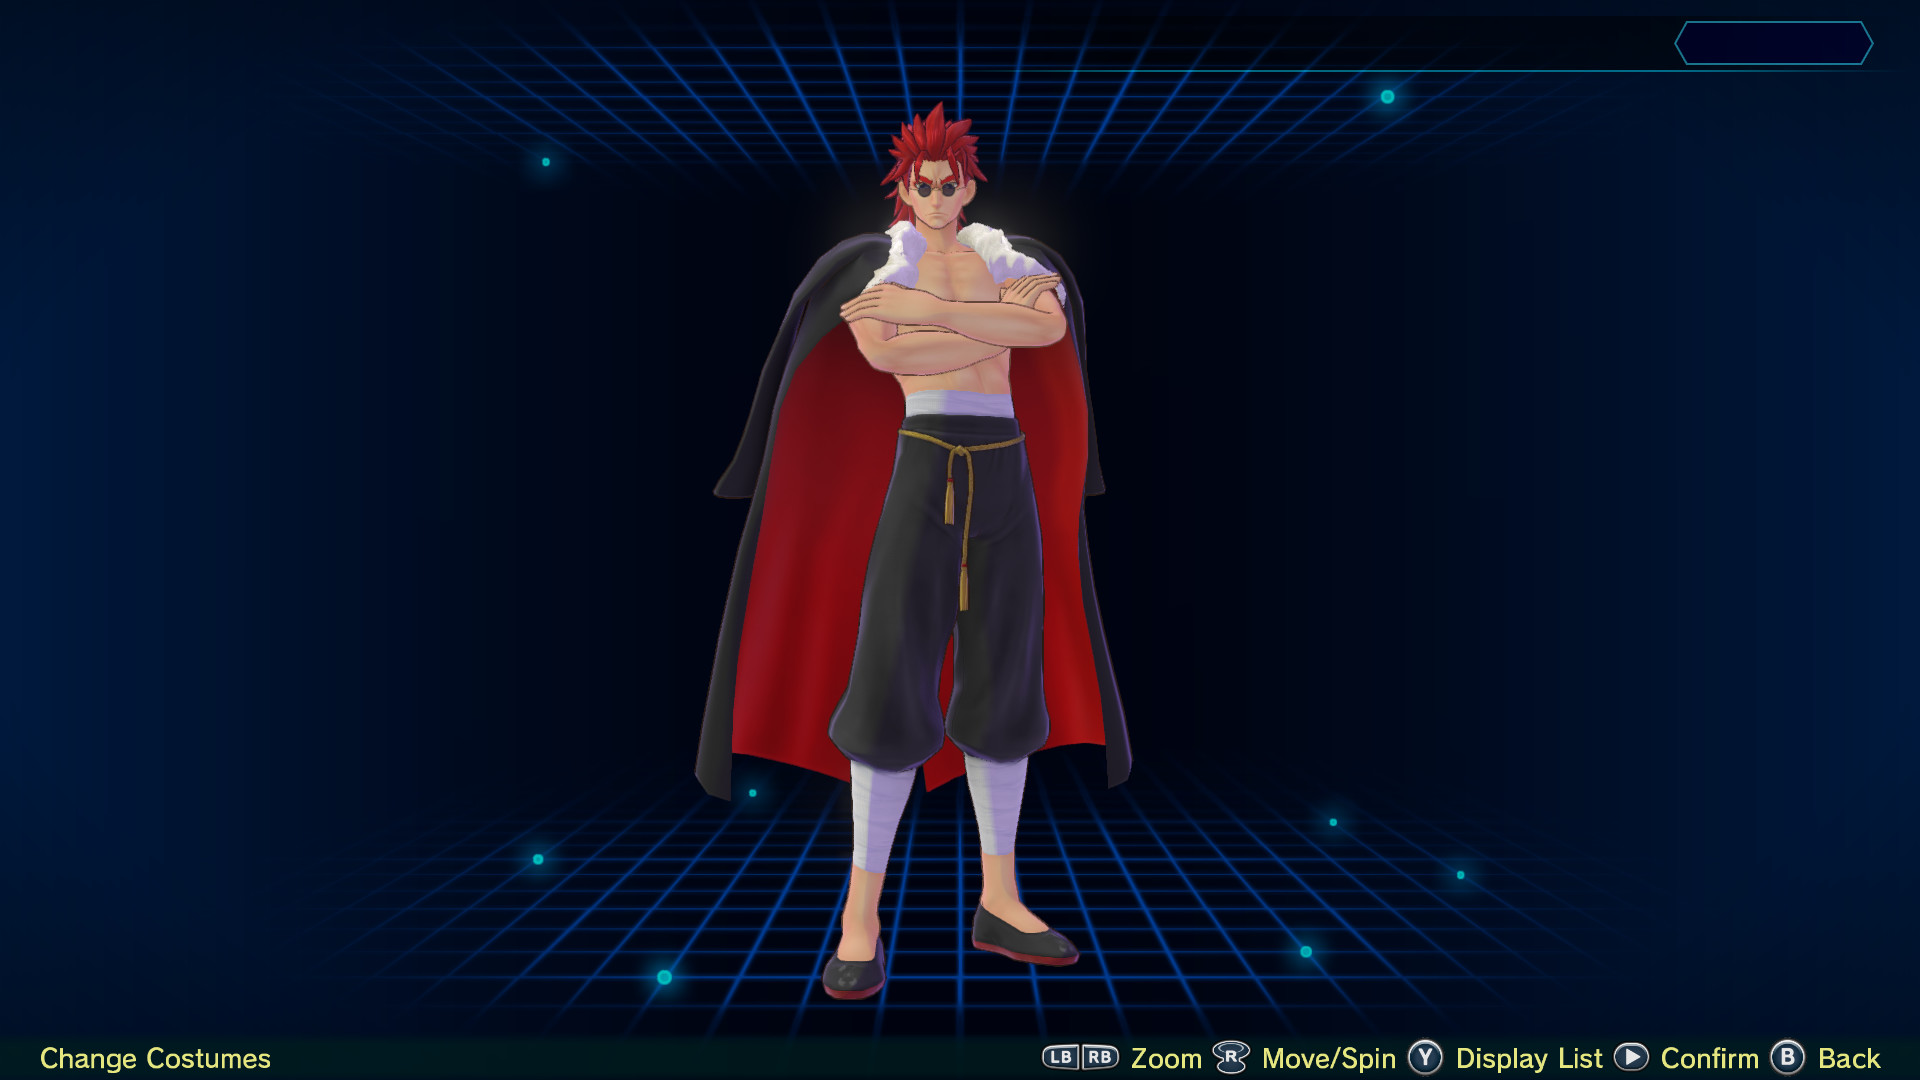 Fate/EXTELLA LINK - Divine Spear's Combat Outfit Featured Screenshot #1